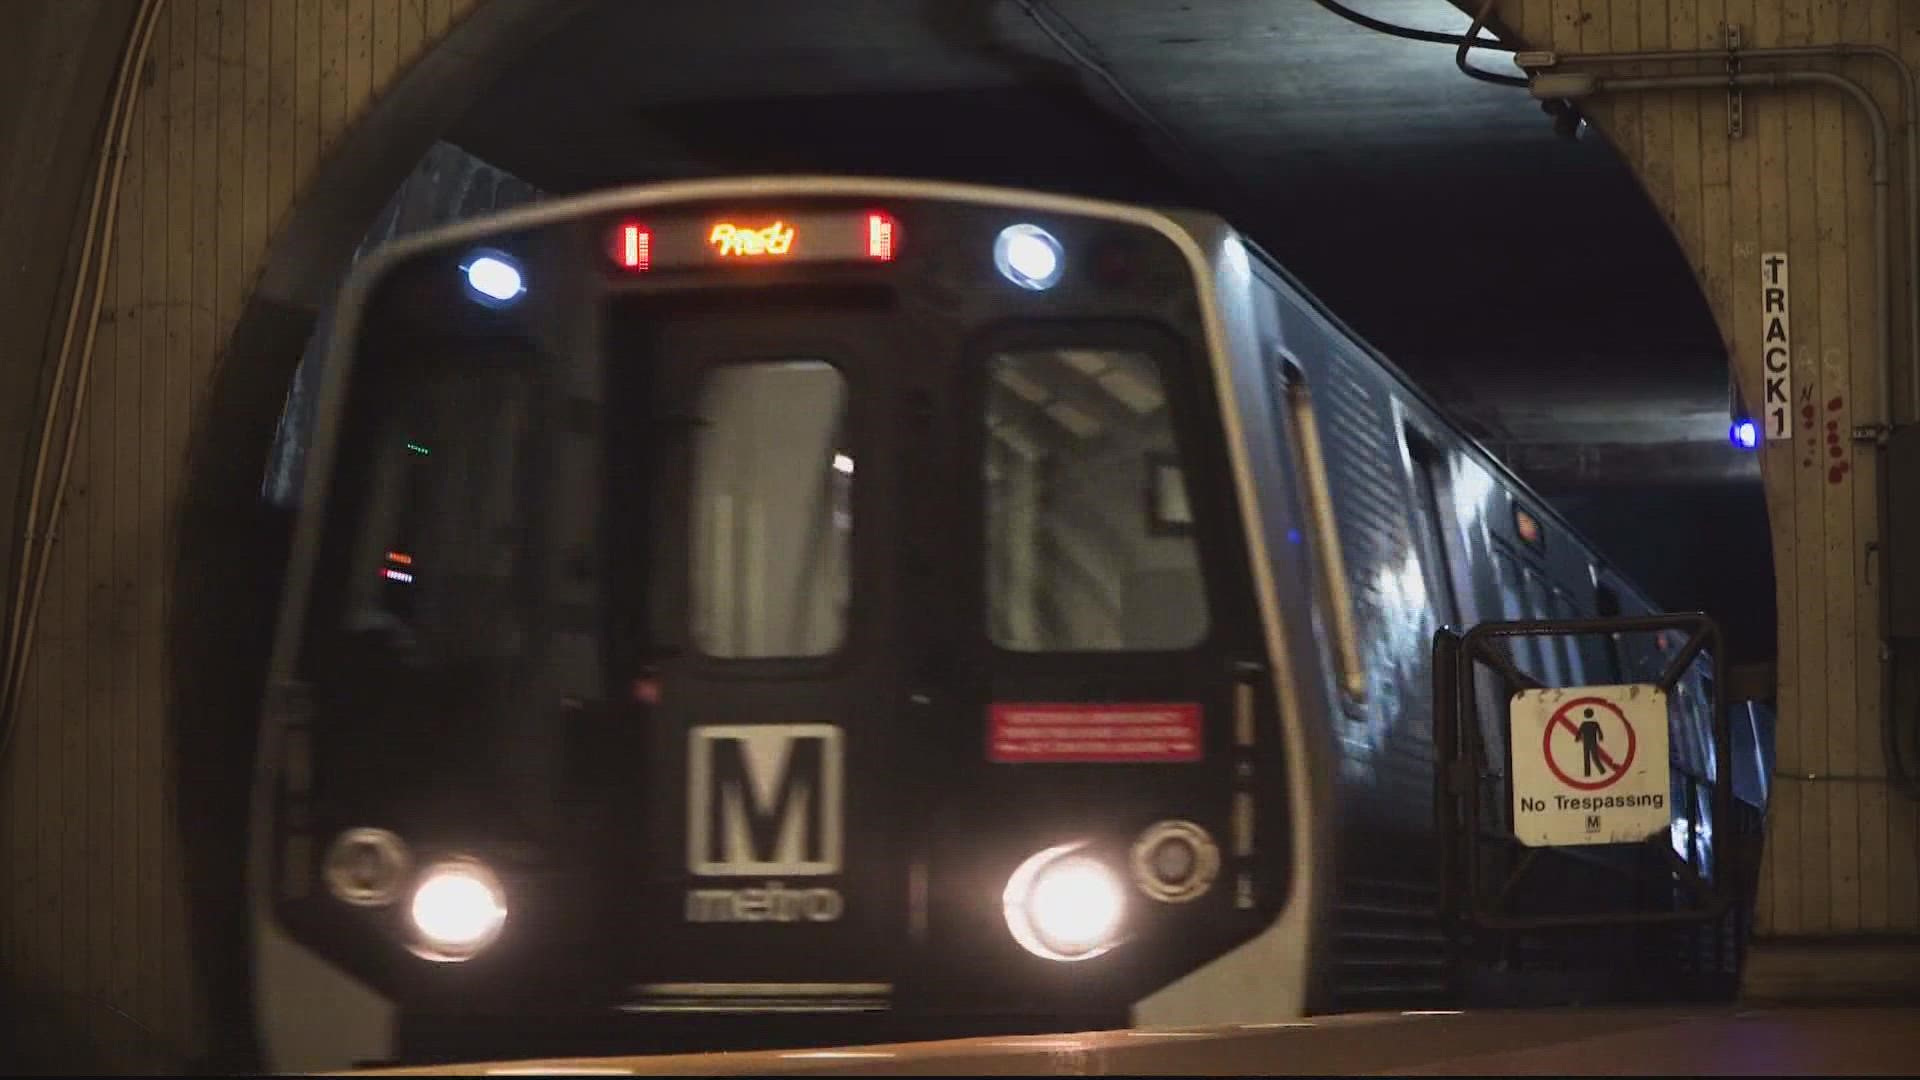 The Washington Metropolitan Safety Commission recently claimed more than 50 WMATA train operators had not received the proper amount of training.